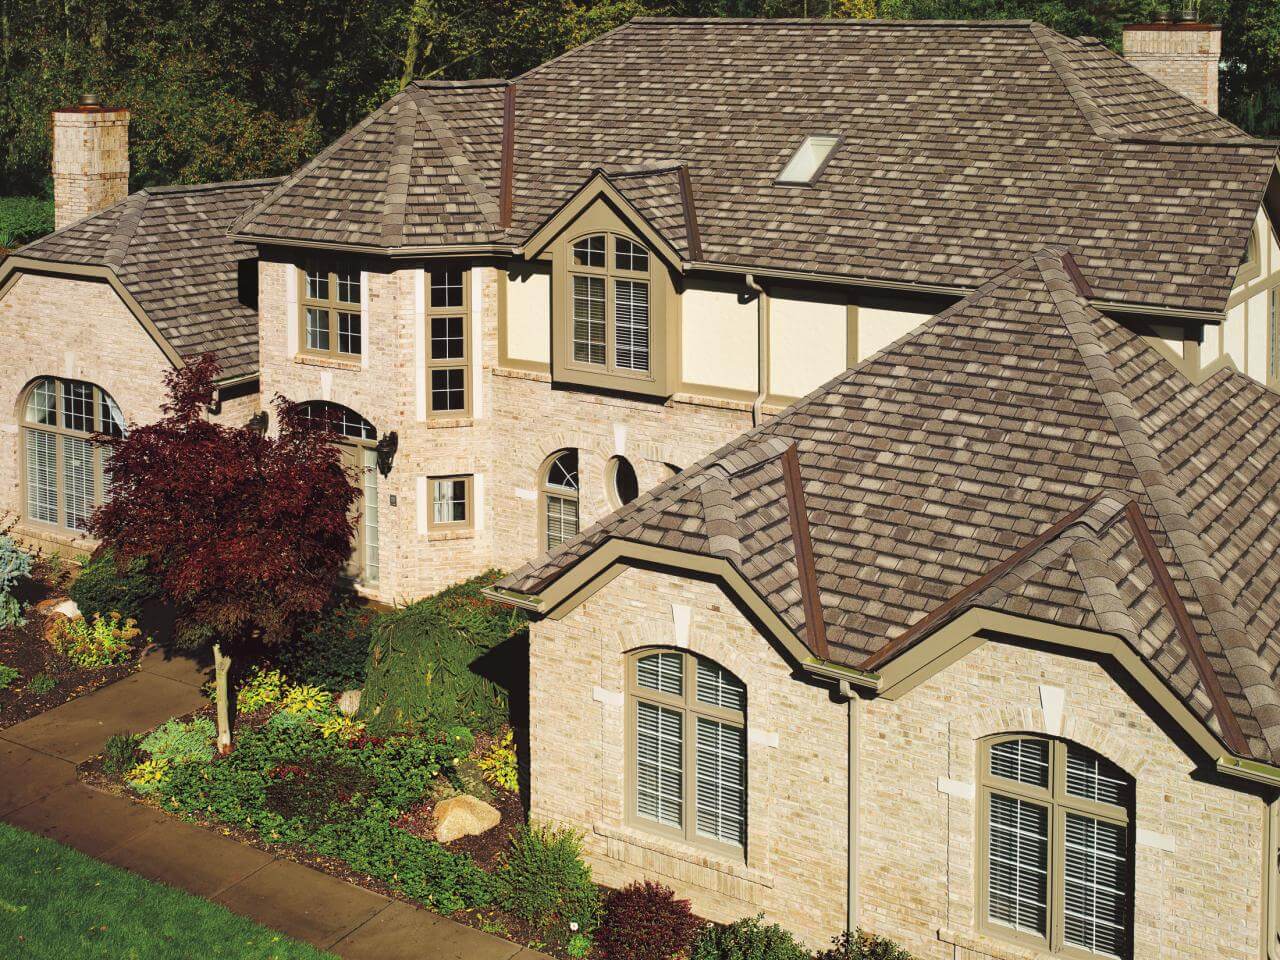 An aerial view of a house with a brown roof
